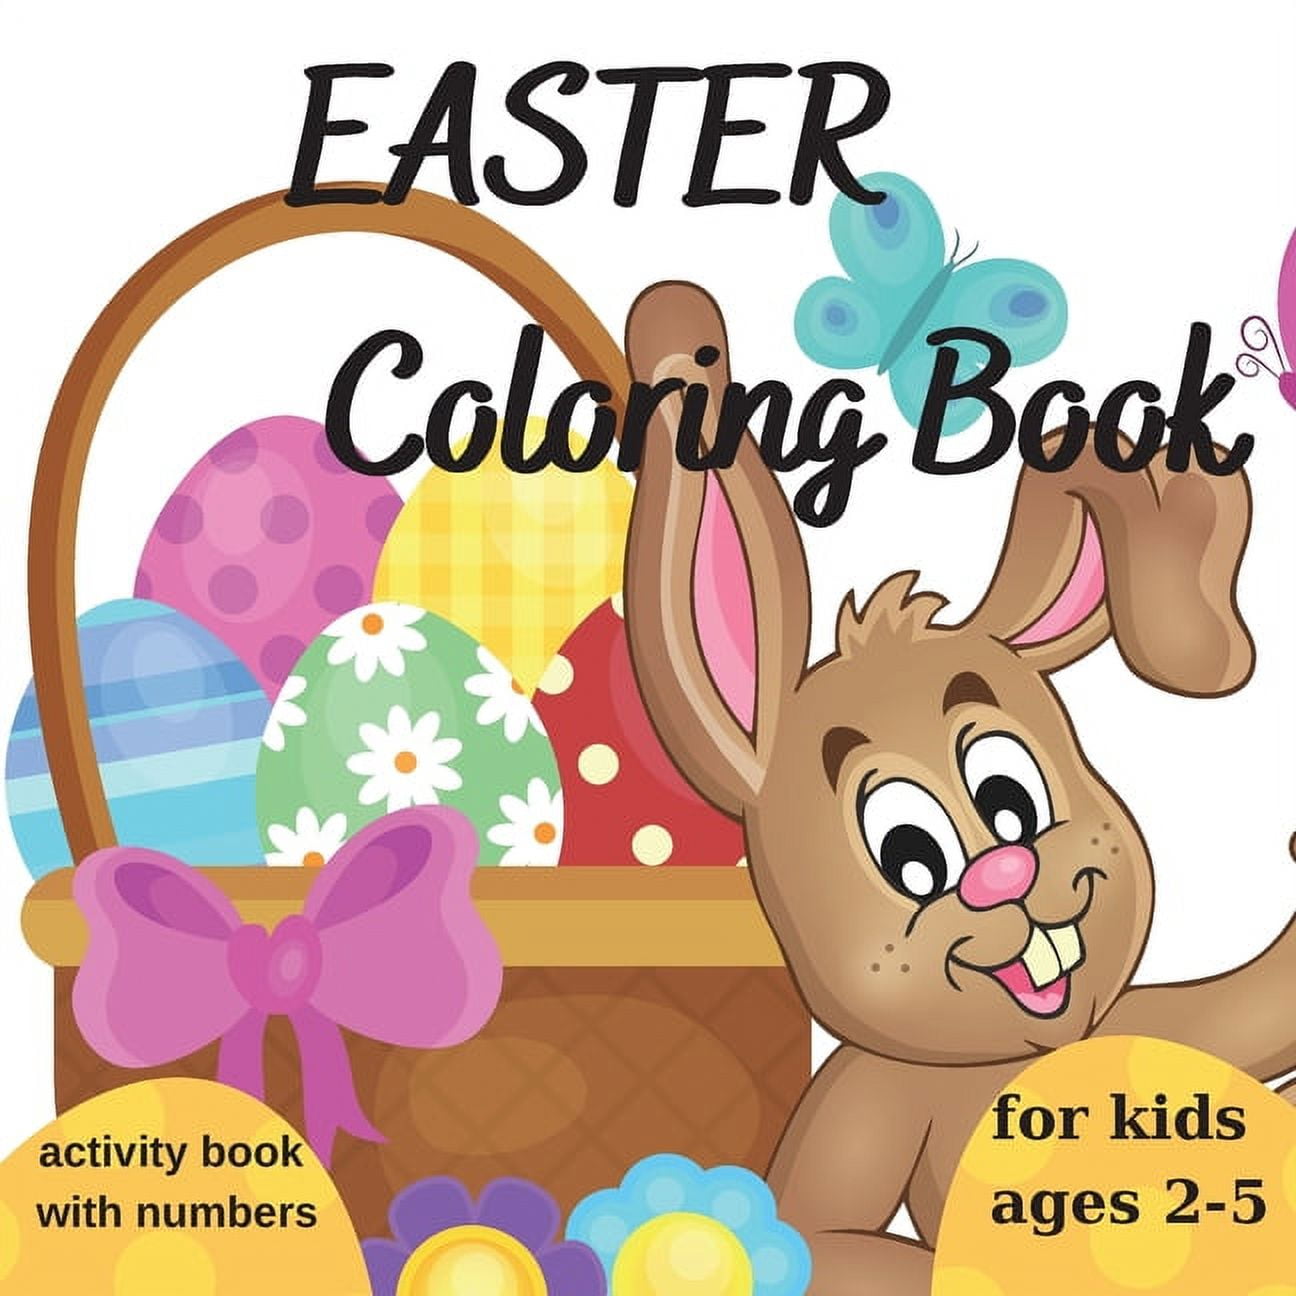 Easter Coloring Book For Kids Ages 2-5: A Fun Colouring Happy